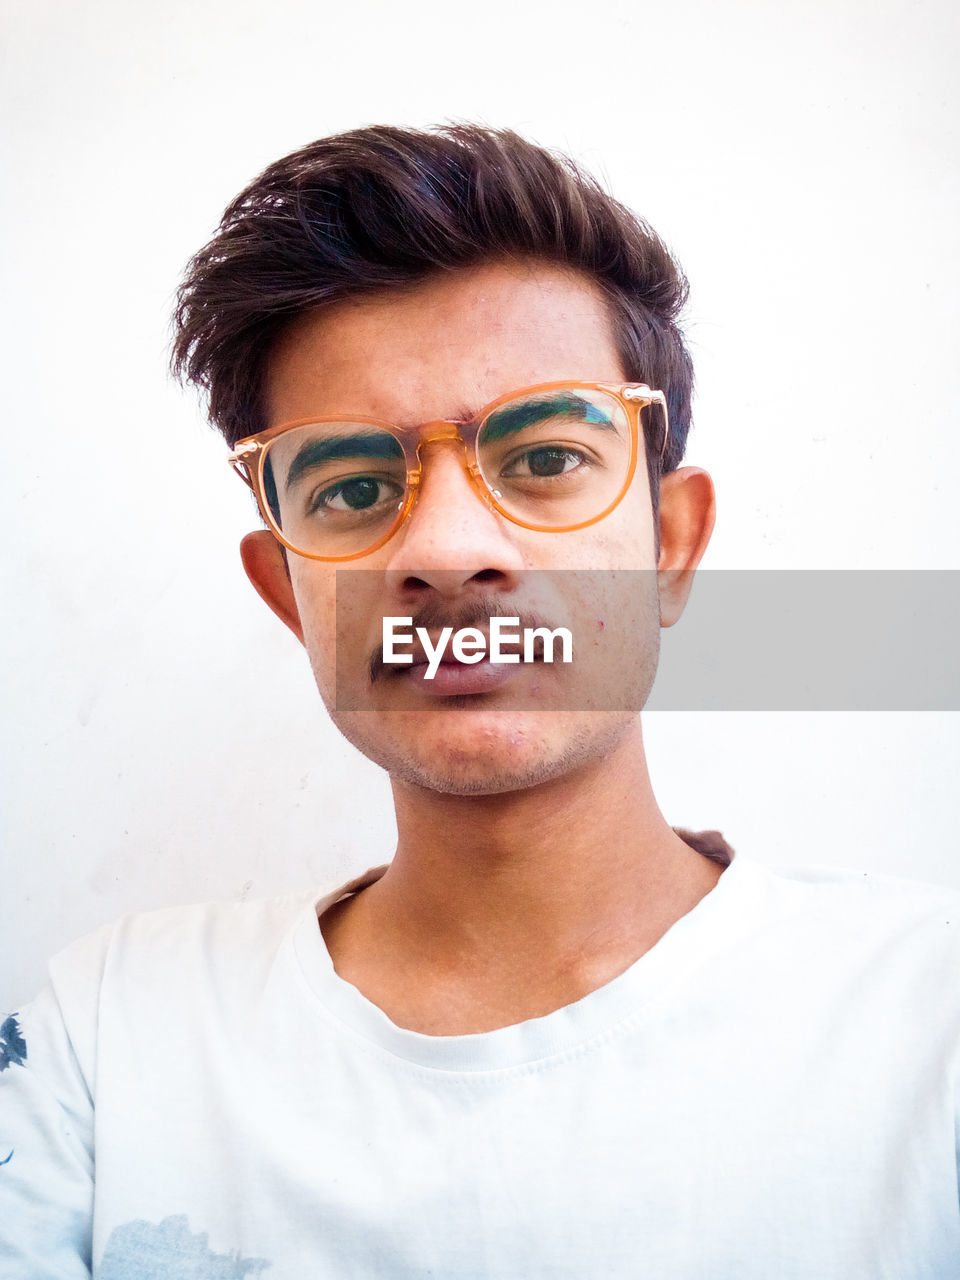 Portrait of young man in eyeglasses against white background